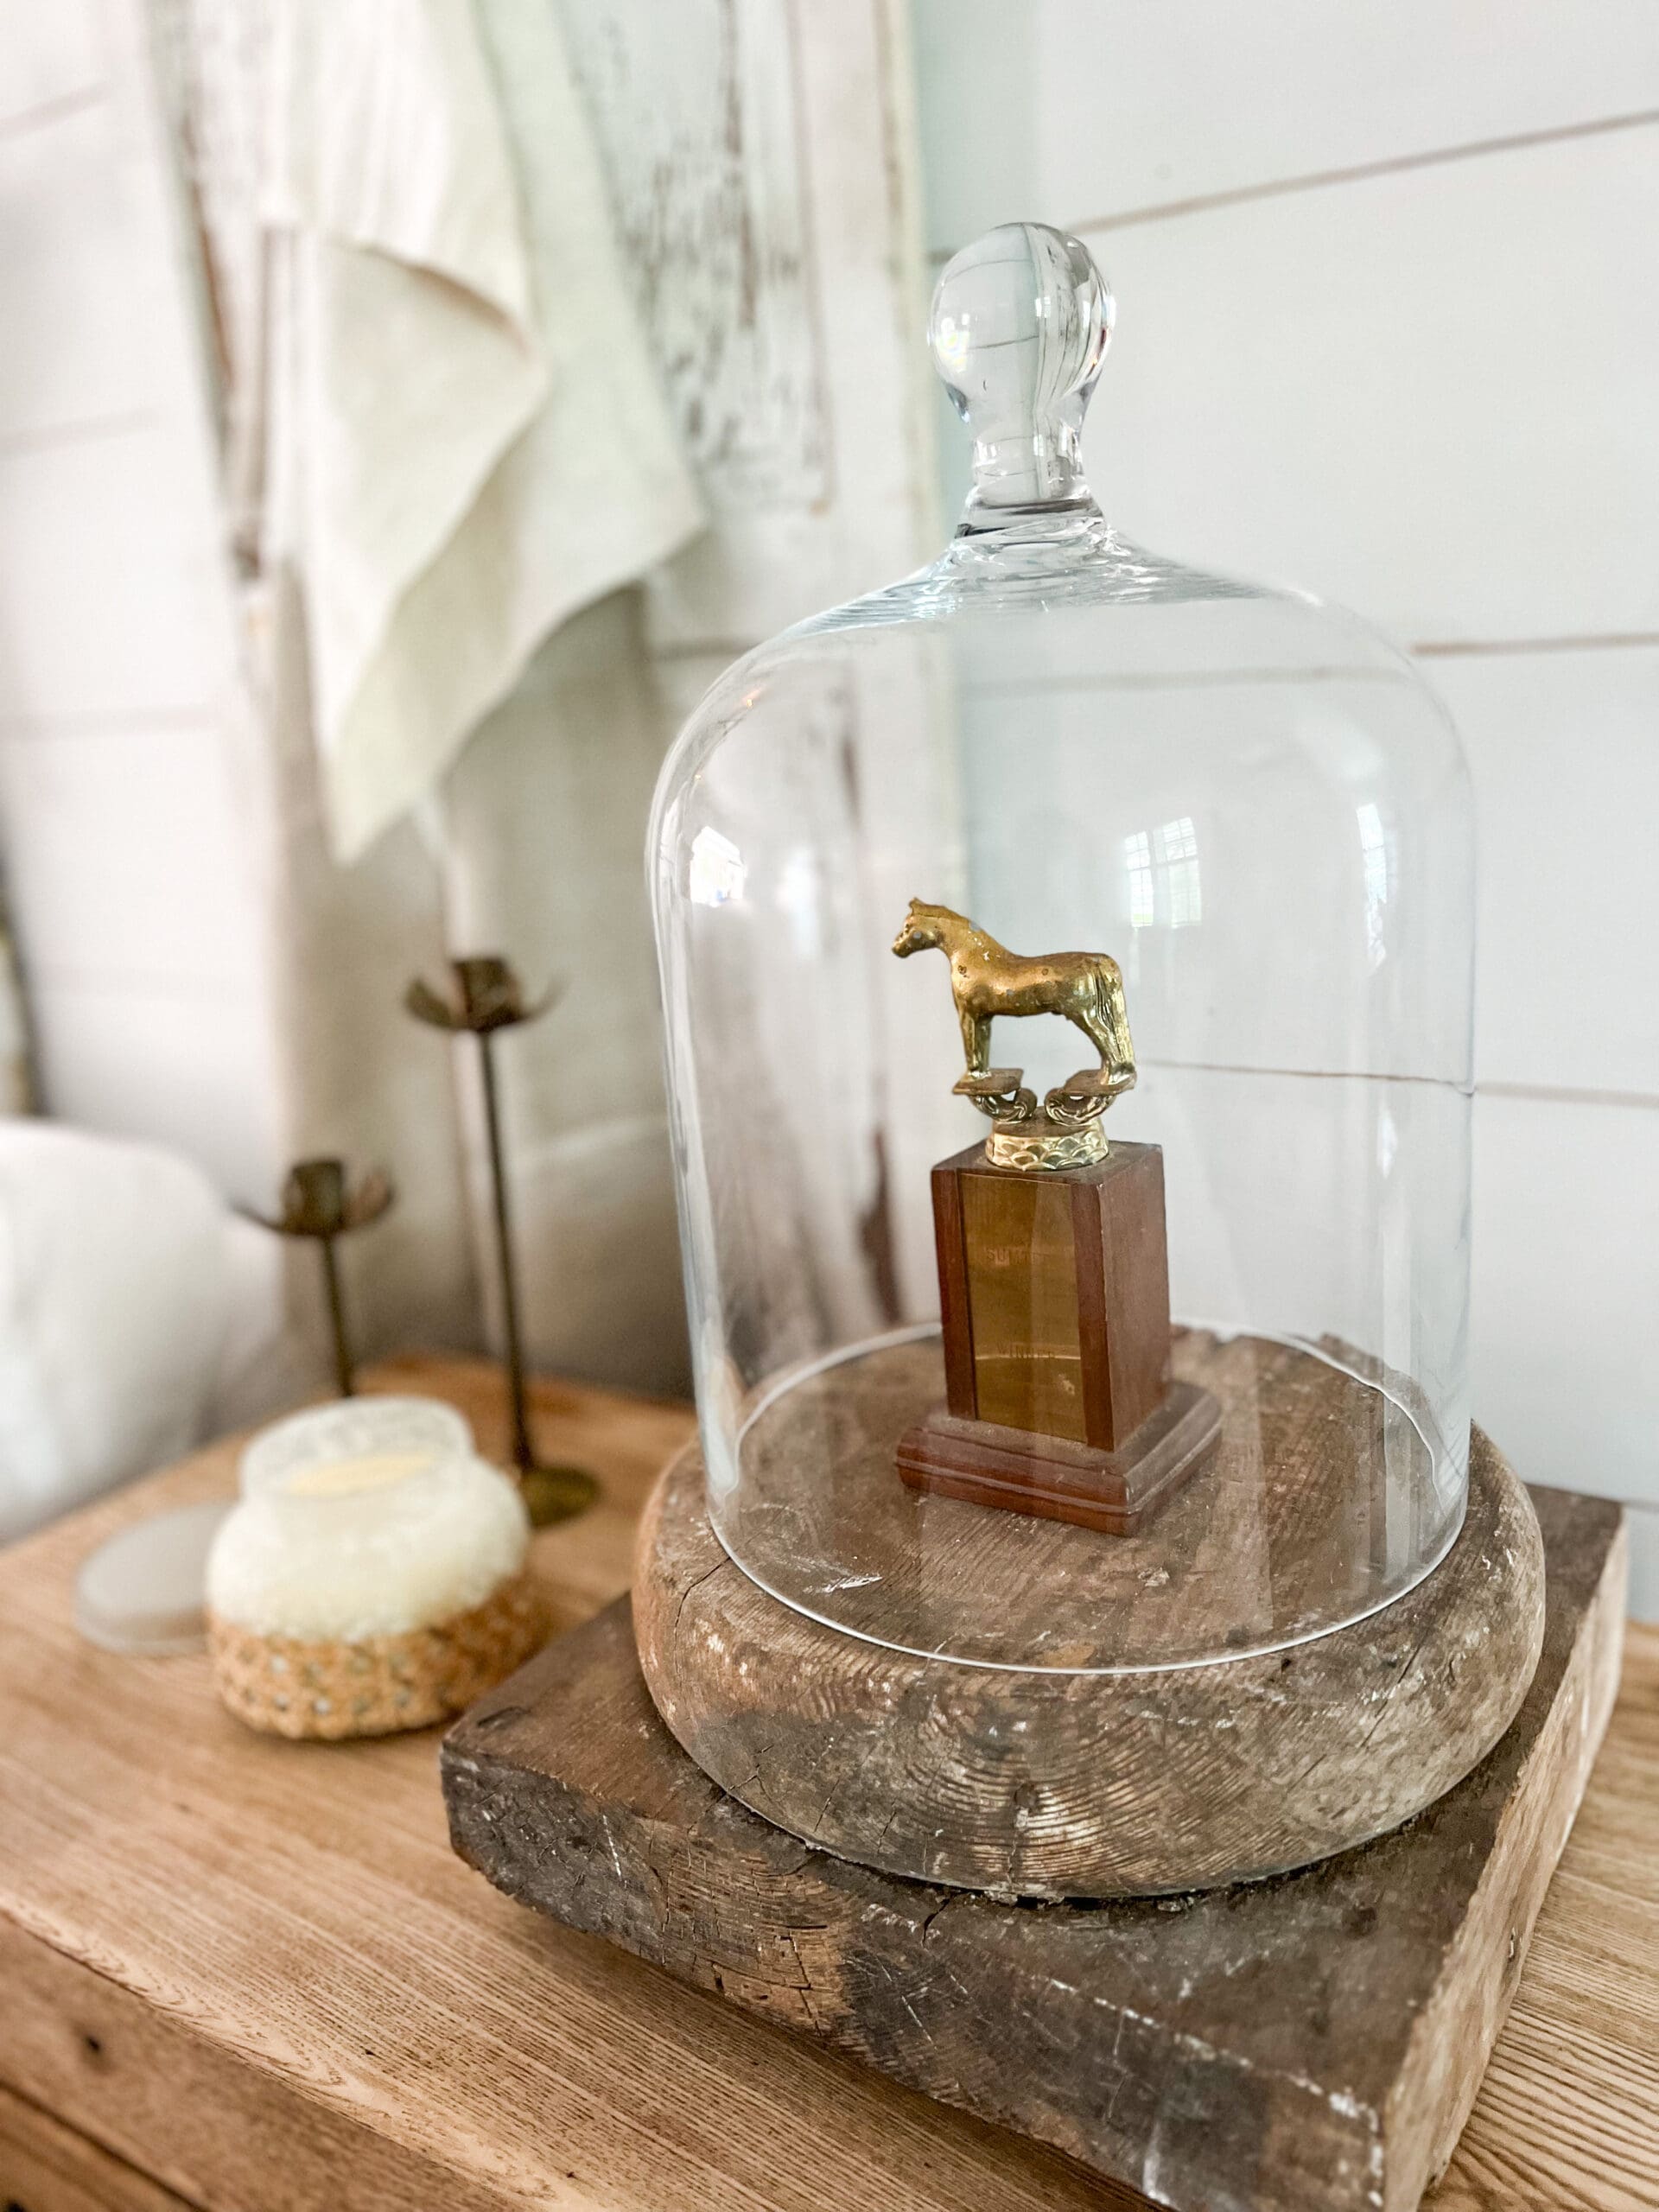 gold and wooden horse trophy underneath glass cloche on unique wooden base